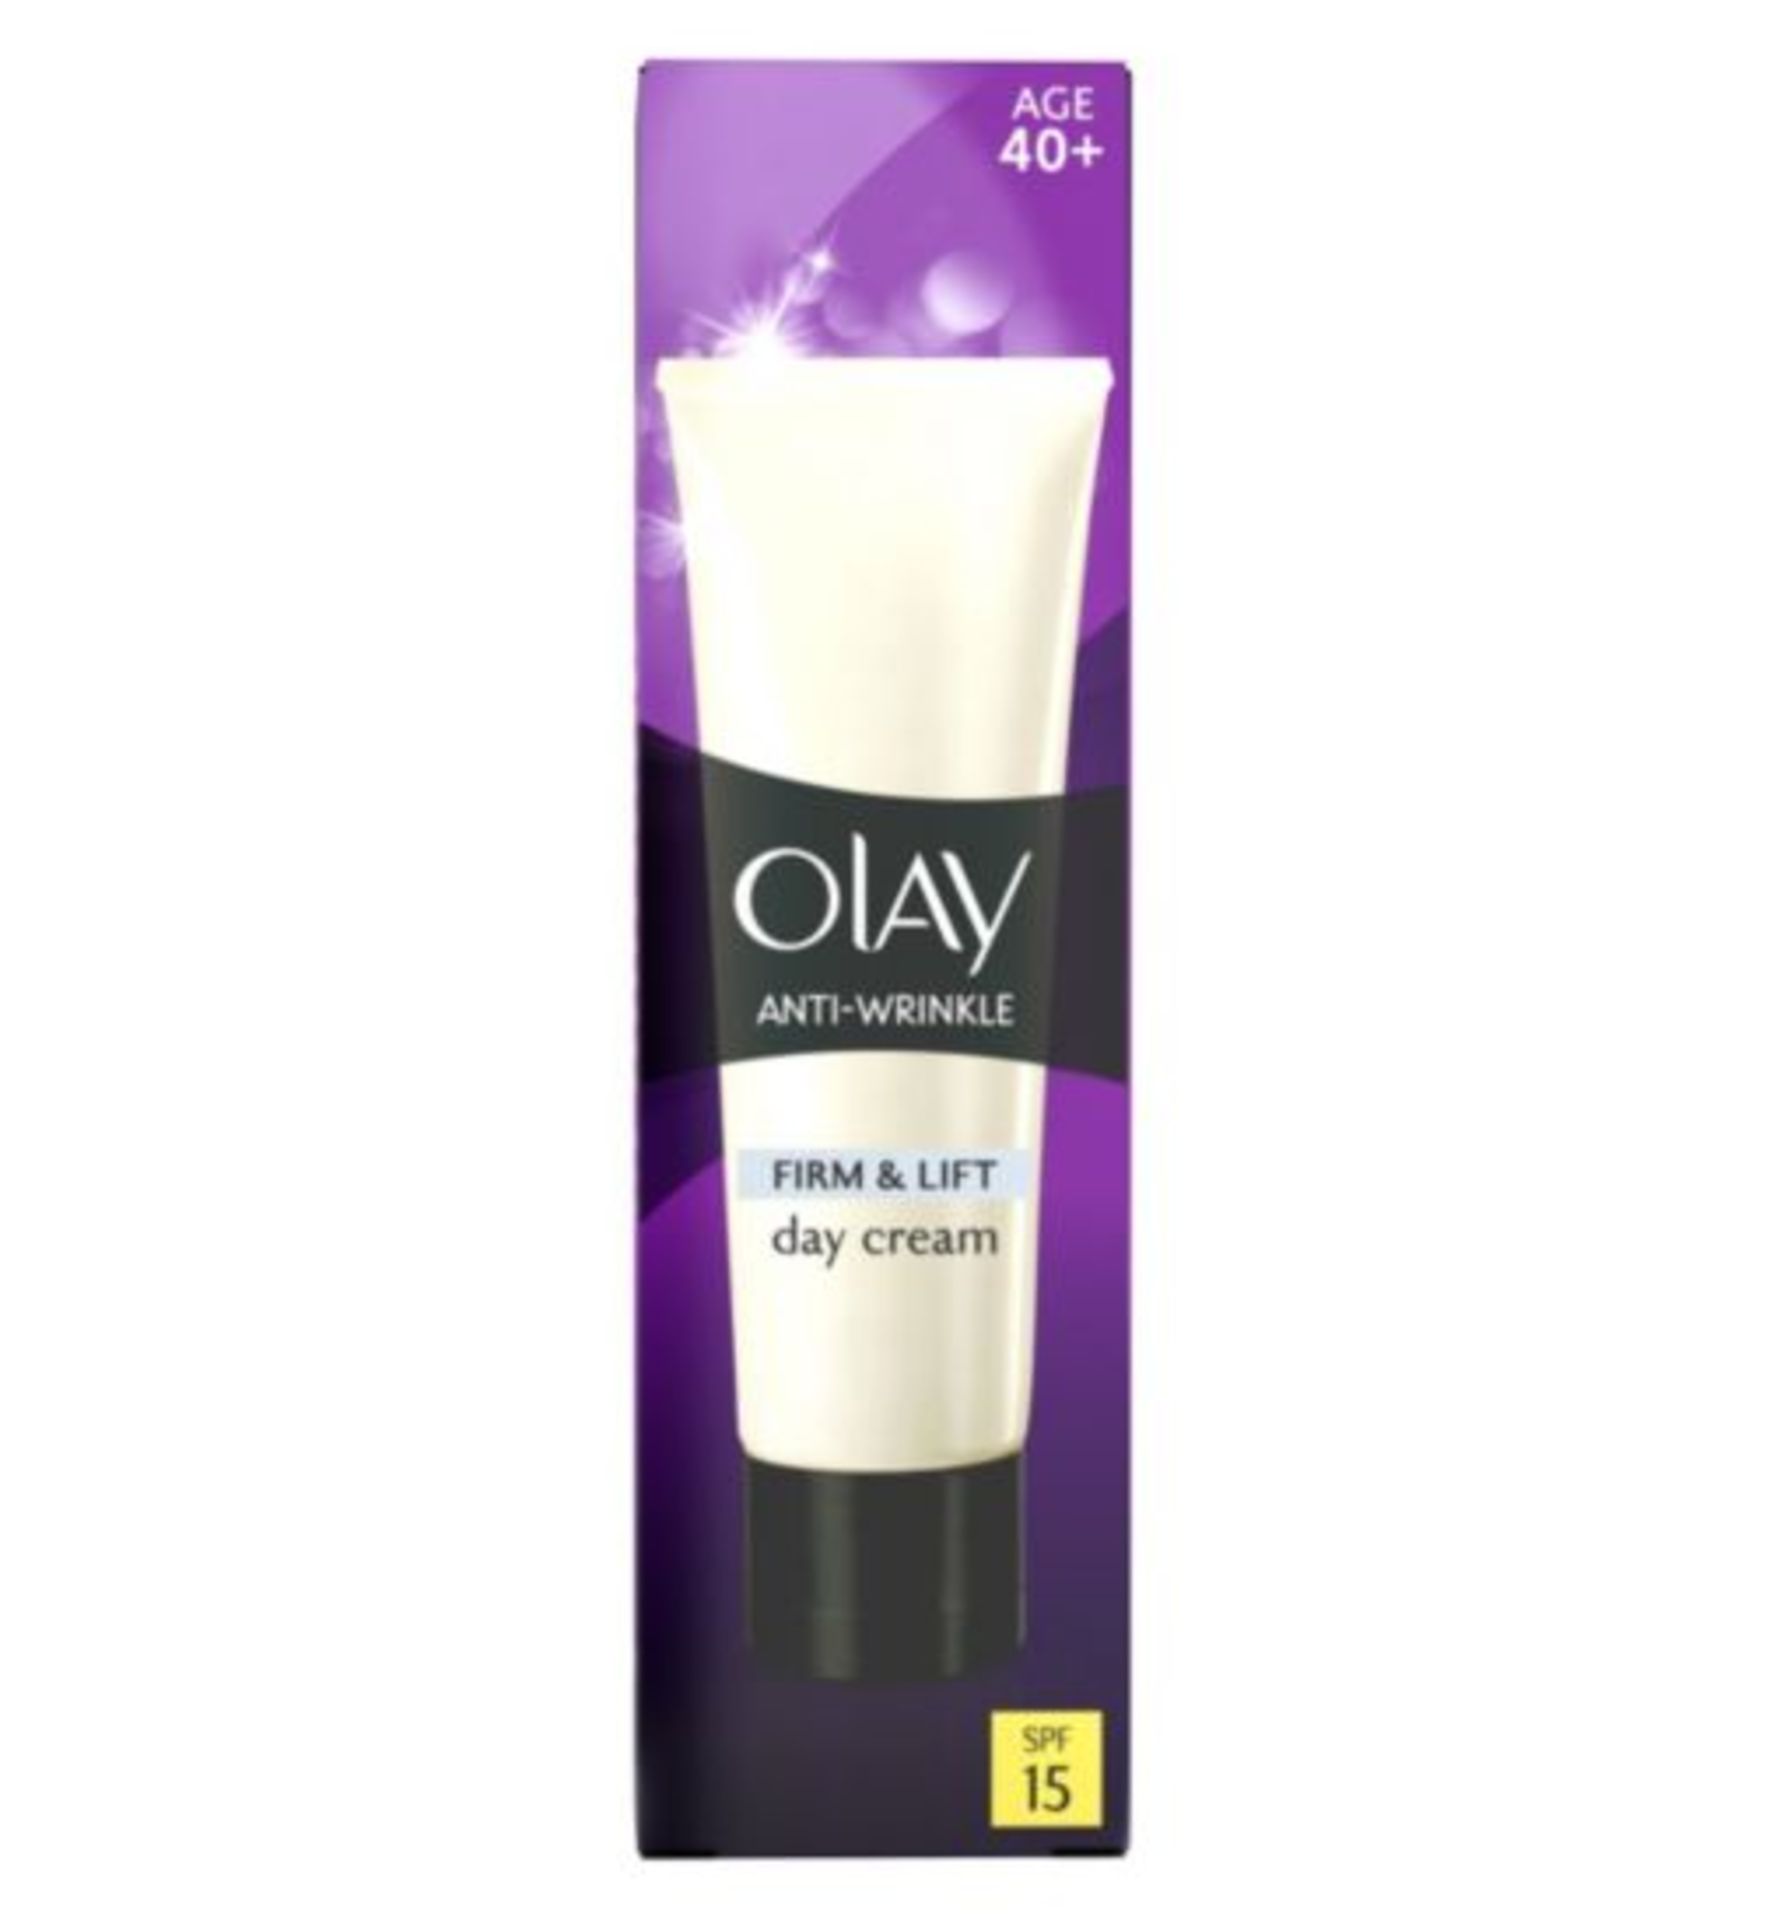 V Brand New Olay anti-wrinkle firm and lift day cream - Tesco Direct £8.32